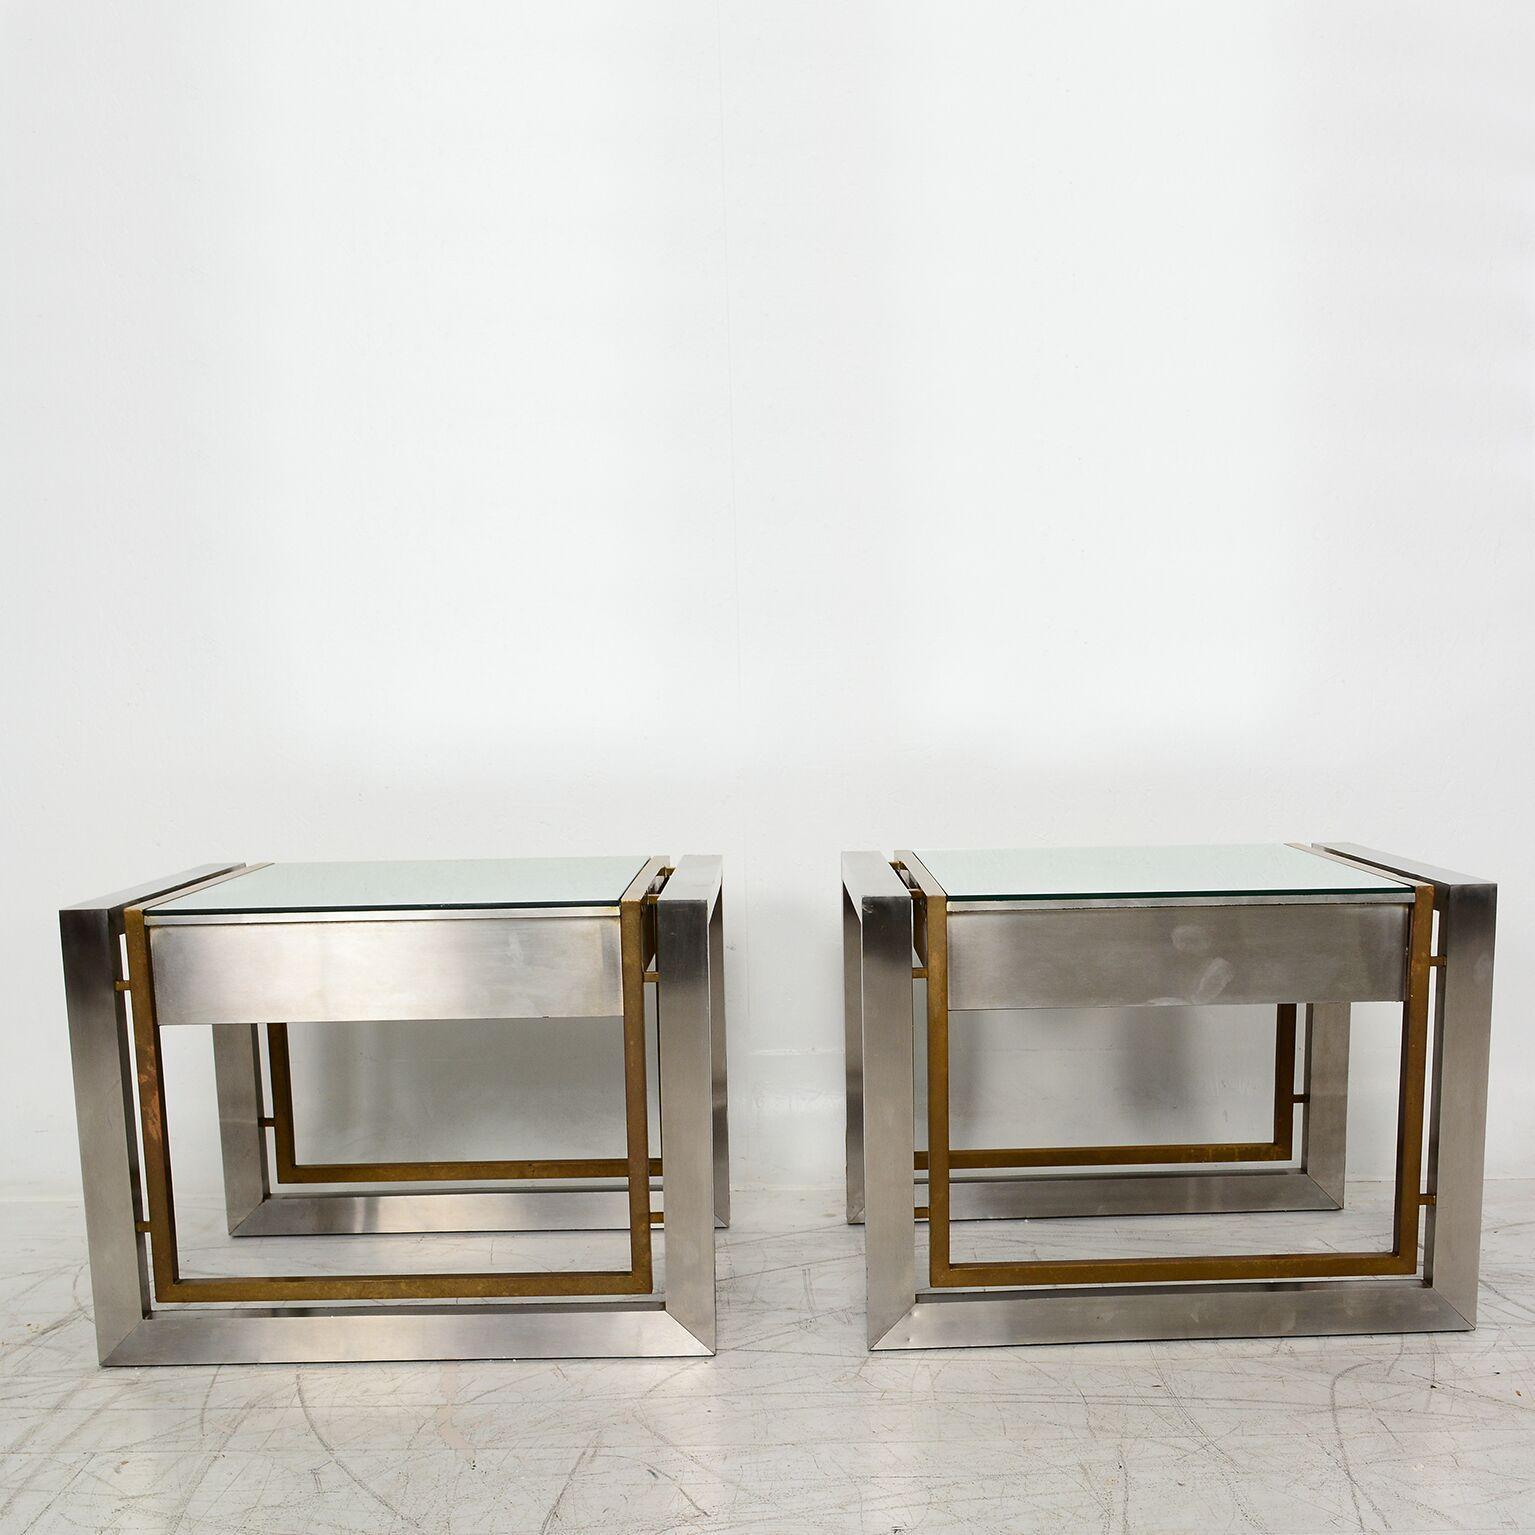 Side Tables with Drawer
a pair of modernist side tables designed by Arturo Pani.
Stainless steel with brass frame. Mirror top (original). Features a pull-out drawer.
Amazing design, very clean and simple. Unmarked.
Dimensions: H 17.75 in. x W 23.75